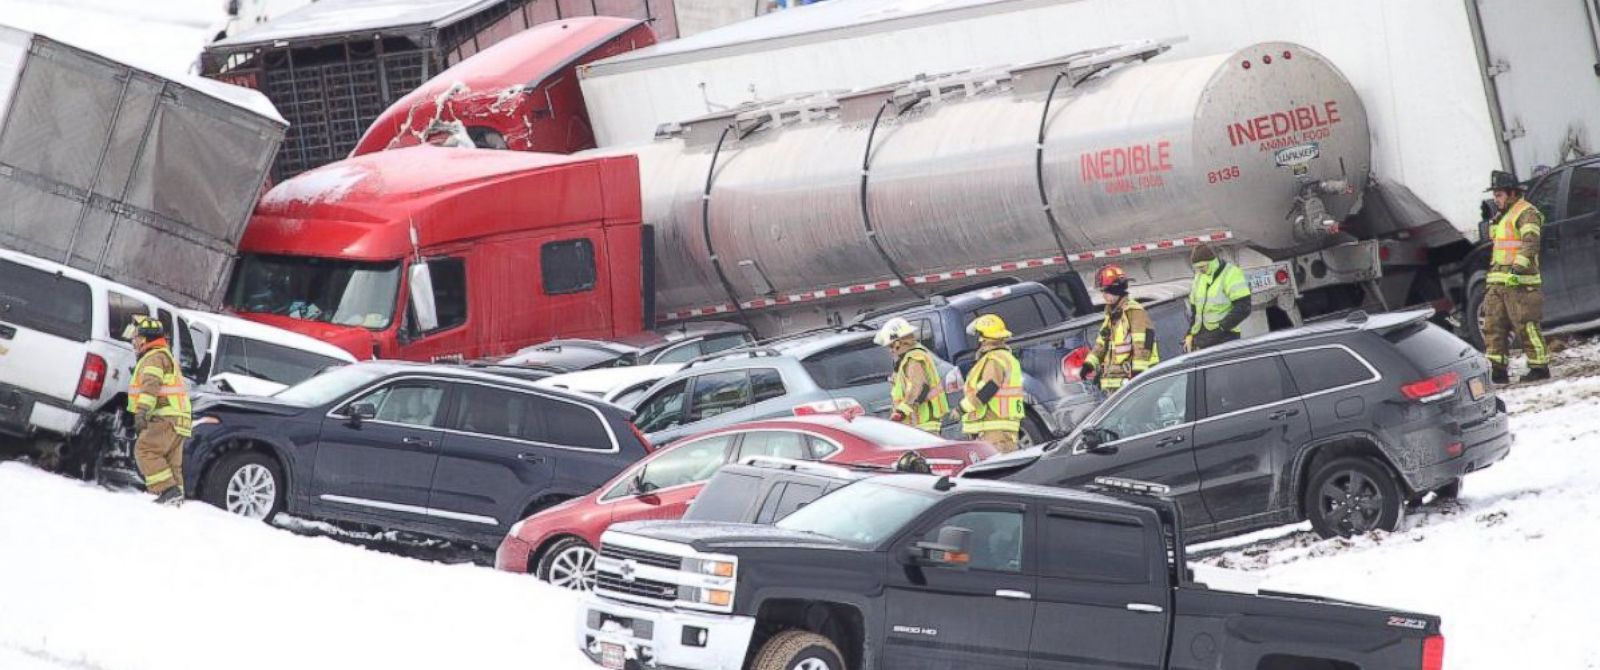 PHOTO: PennLive.com posted this photo to Twitter on Feb. 13, 2016 showing more than a dozen vehicles involved in a multi-fatal crash on I-78 in Lebanon County.